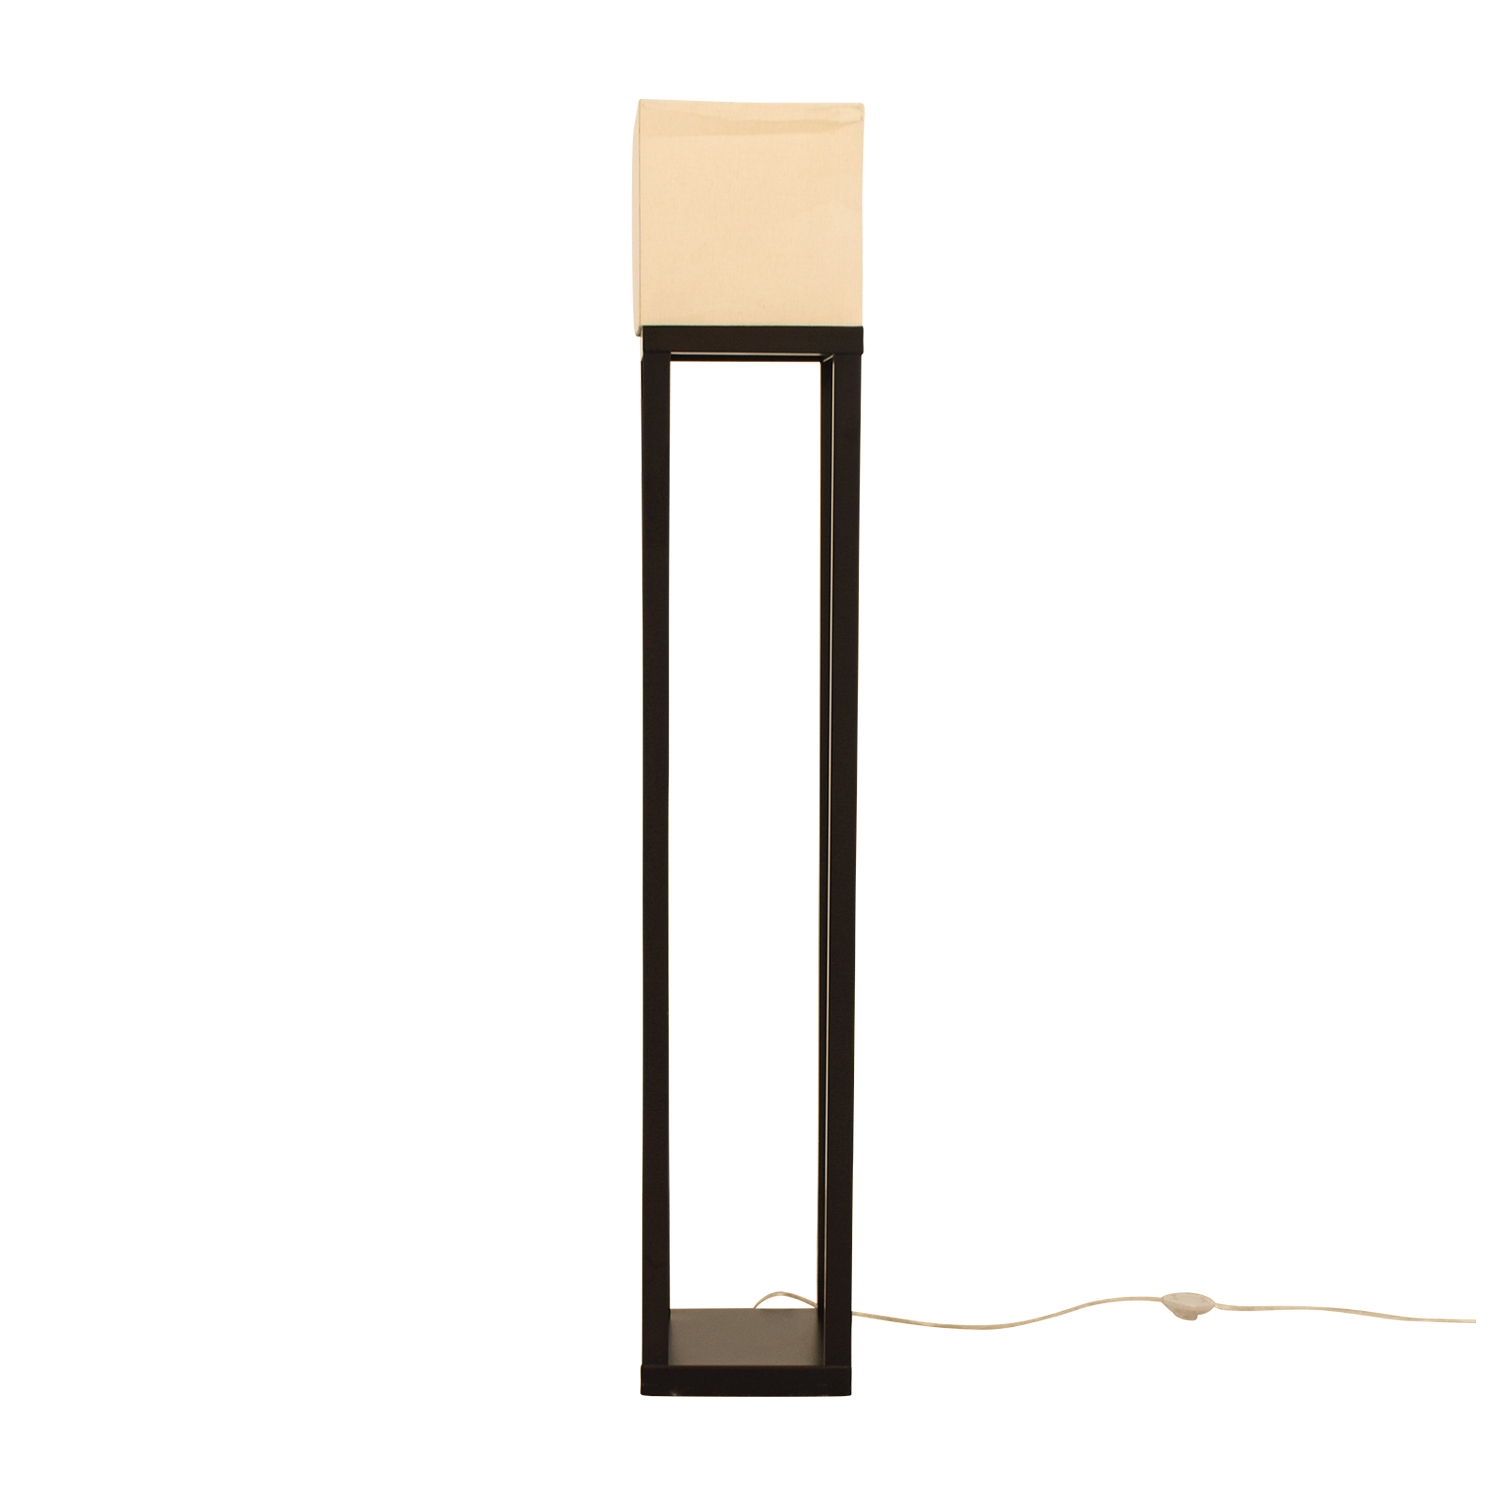 71 Off Crate Barrel Crate Barrel Aerin Floor Lamp Decor intended for sizing 1500 X 1500